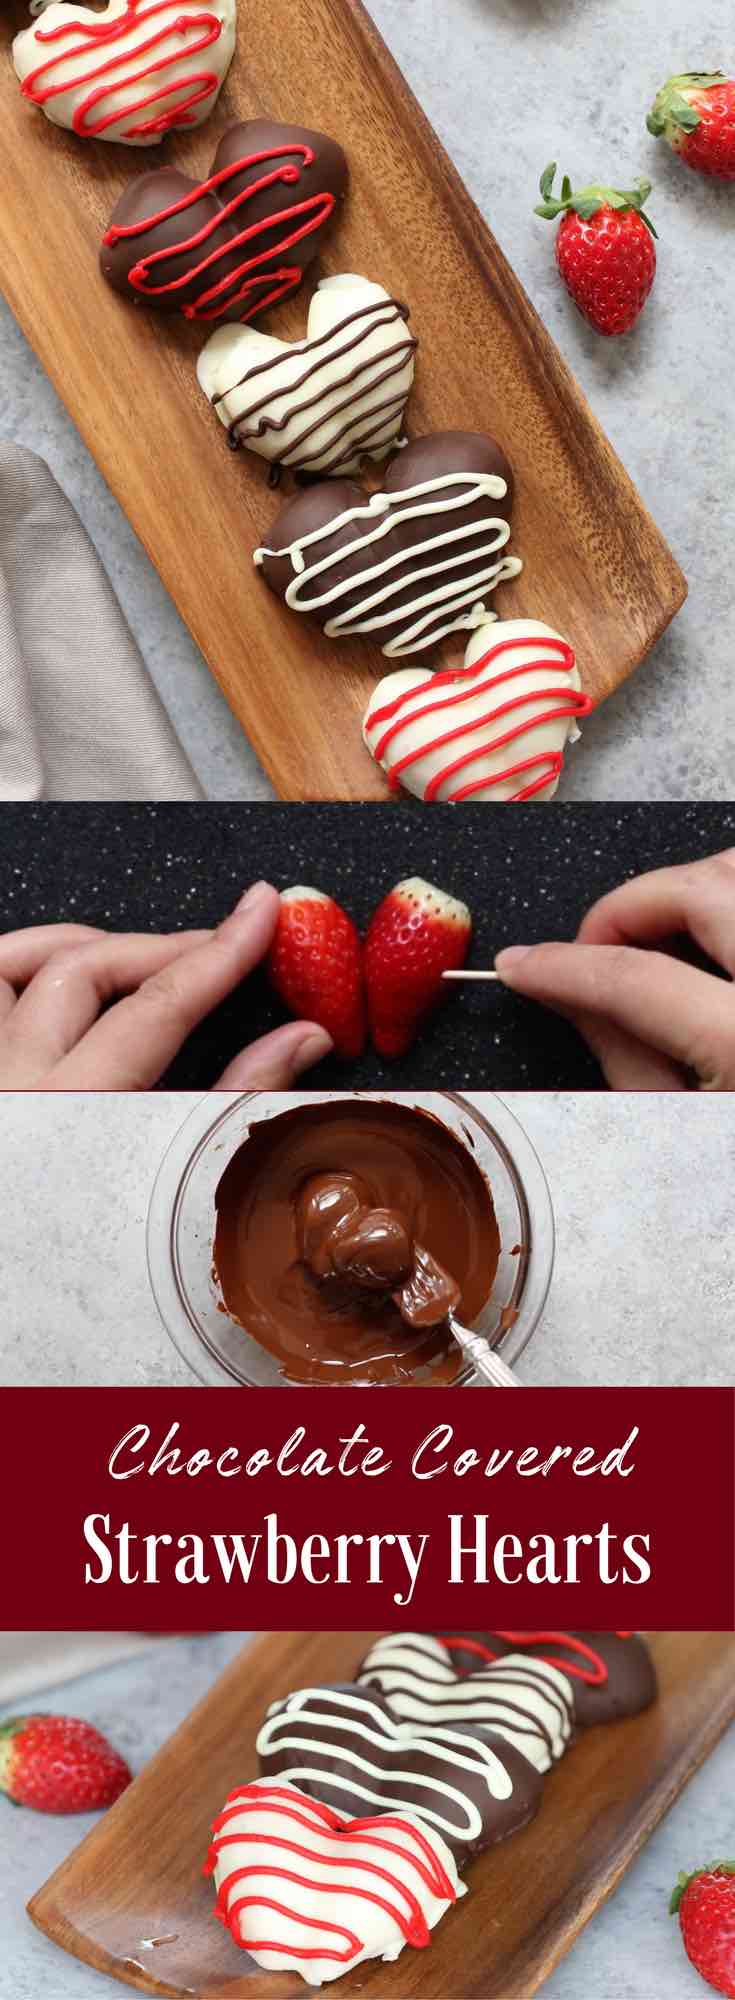 Chocolate Covered Strawberries – The easiest and most beautiful homemade gifts around! It takes 30 minutes to make and taste absolutely heavenly. Fresh and juicy strawberries are cut in half, making the heart shapes, then covered with gourmet semisweet or white chocolate. Decorate them with red decorating gel and melted chocolate. Just 4 ingredients are all you need! So good! Quick and easy recipe, no bake dessert, valentine’s recipe, mother’s day recipe. Video recipe. | Tipbuzz.com